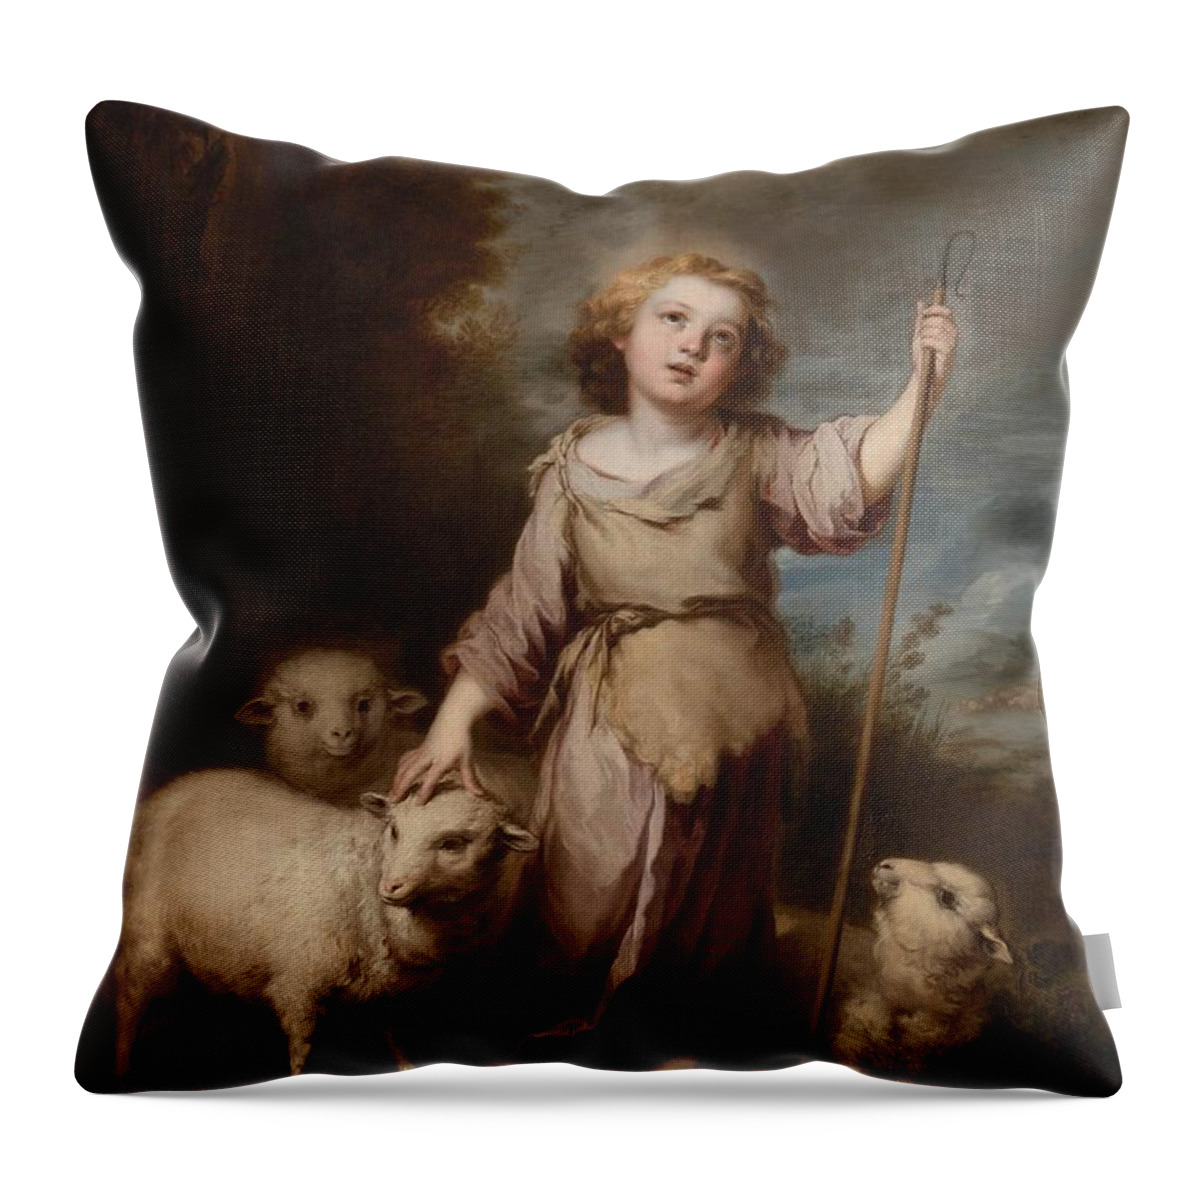 Bartolome Esteban Murillo The Good Shepherd Throw Pillow featuring the painting The Good Shepherd by MotionAge Designs